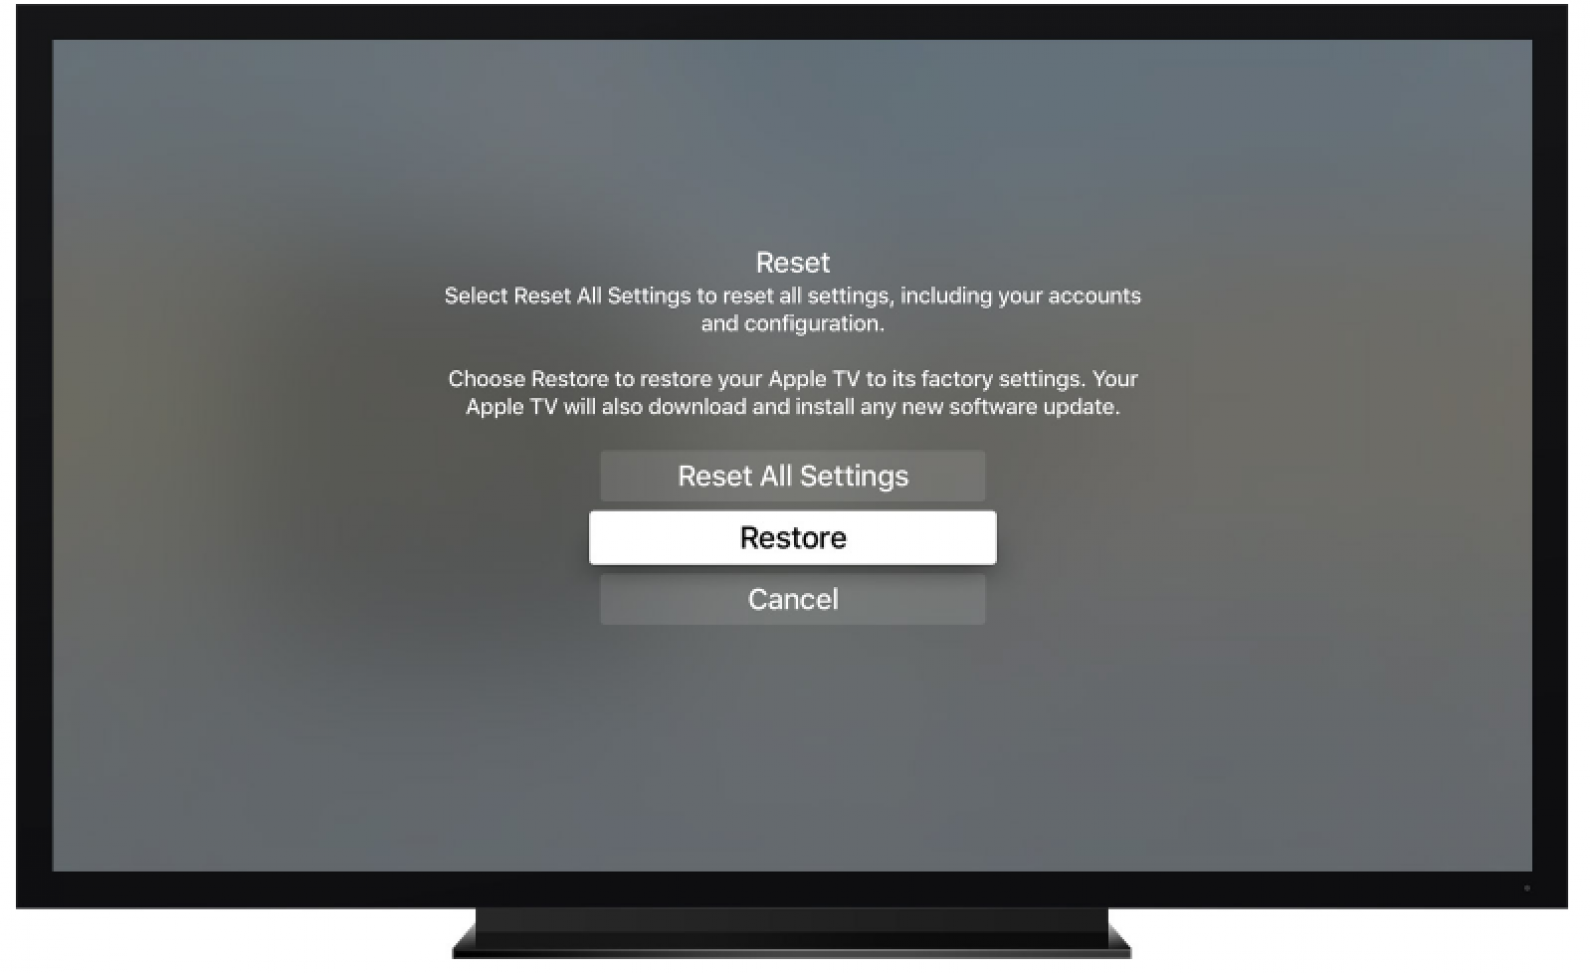 Apple TV Troubleshooting: How to Reboot, Restart, and Reset Apple TV